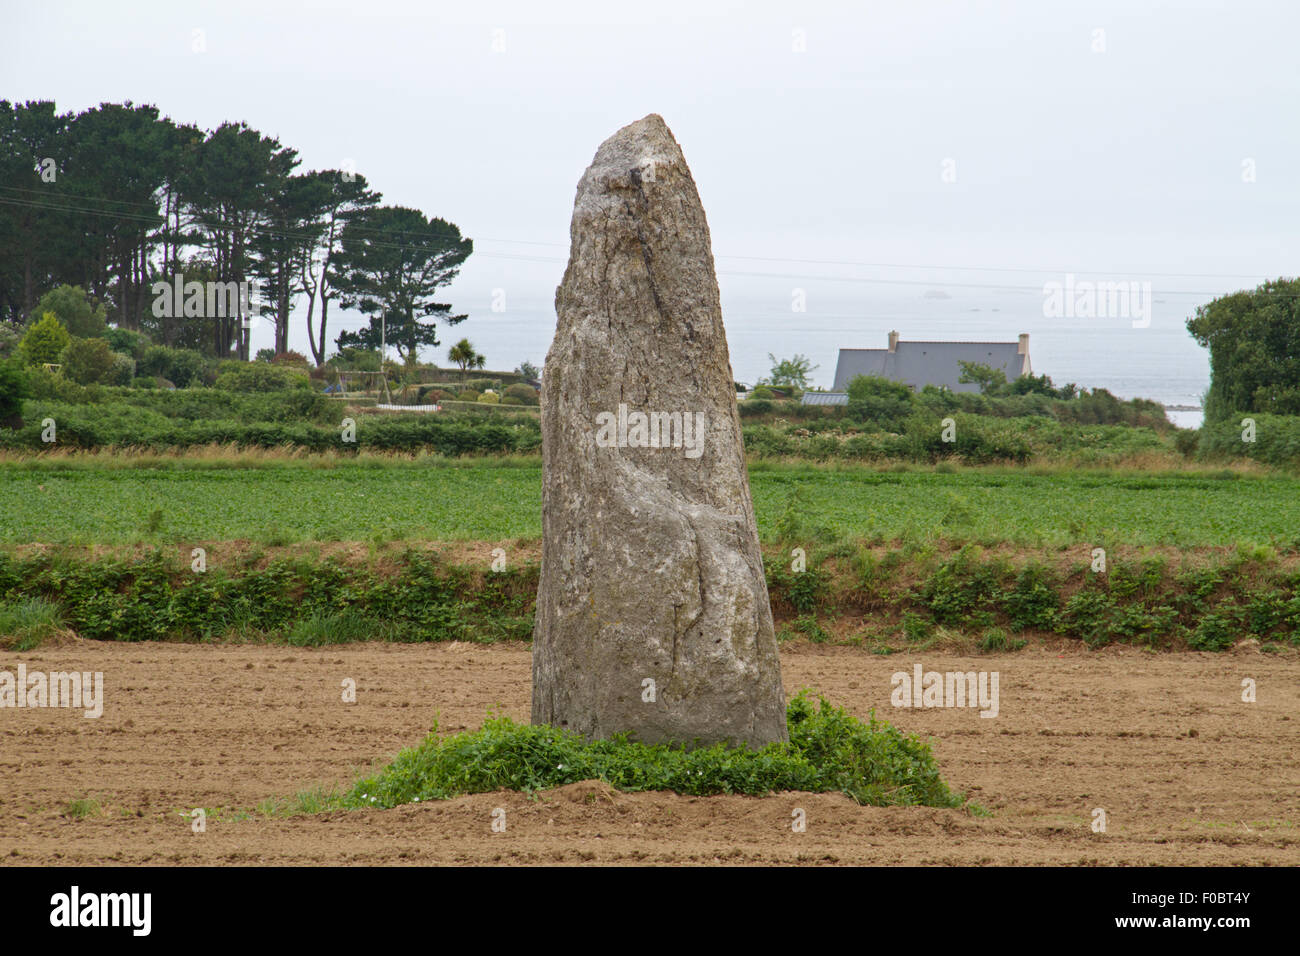 A standing stone or menhir in an agricultural field in Brittany, France Stock Photo